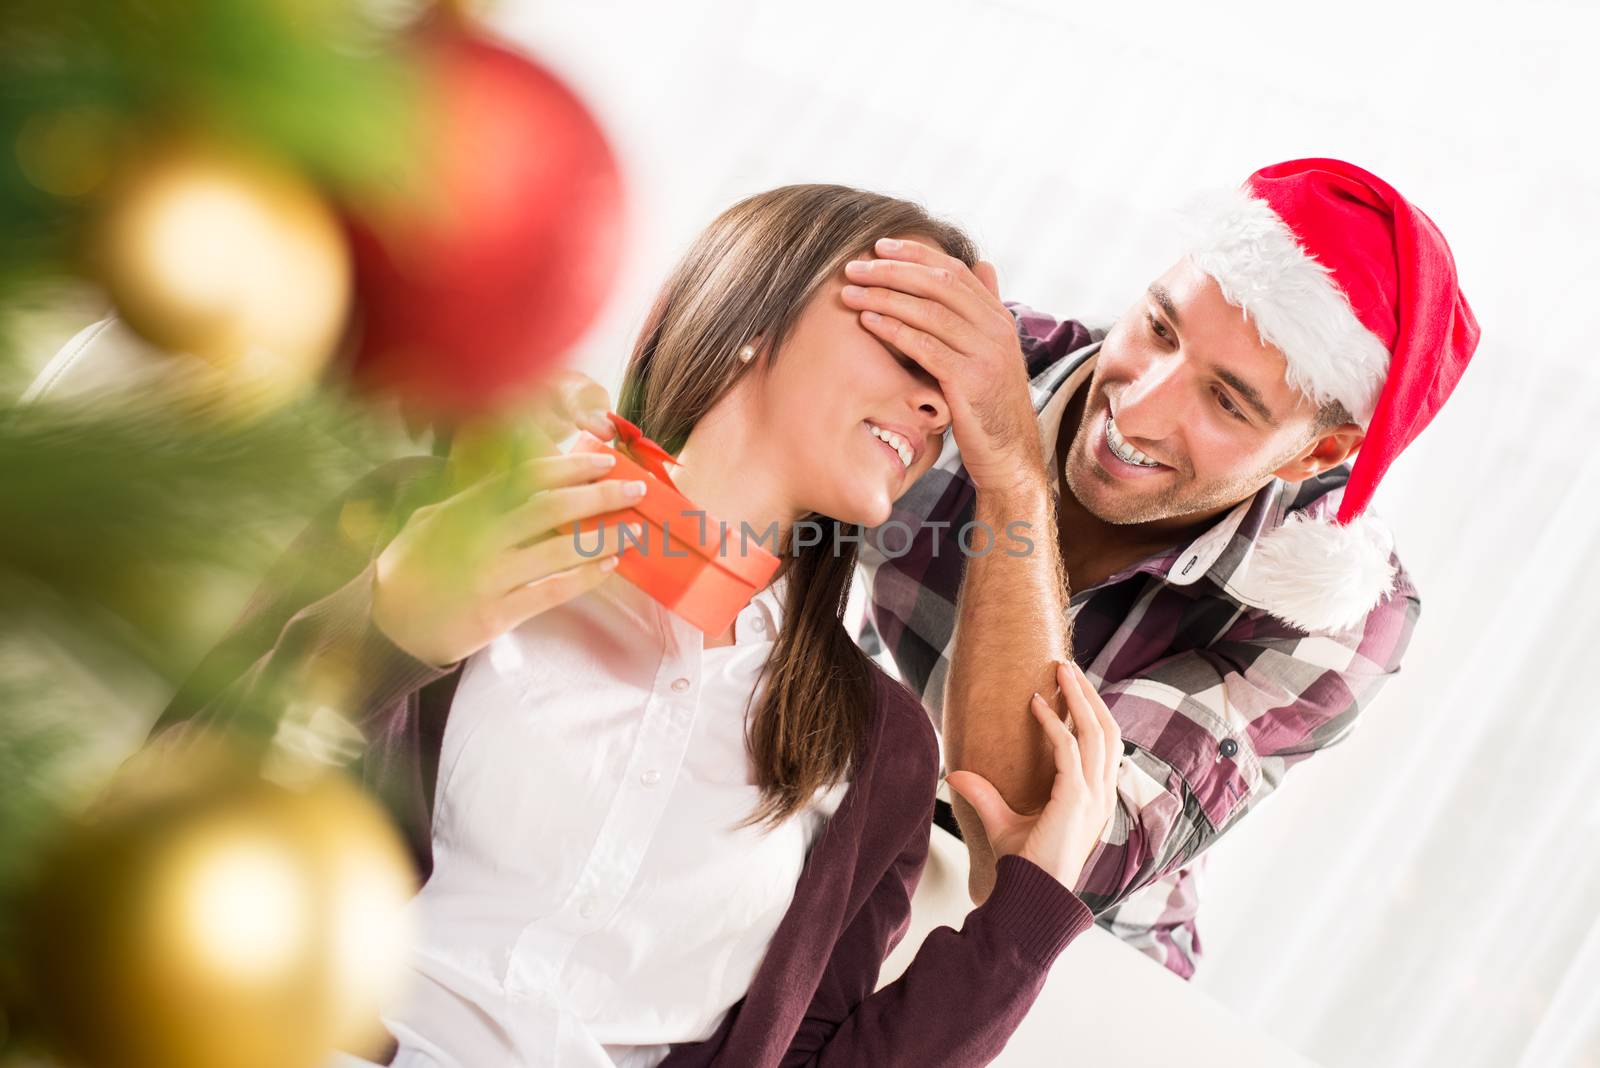 Young man gives his girlfriend a Christmas gift holding his hand over her eyes.